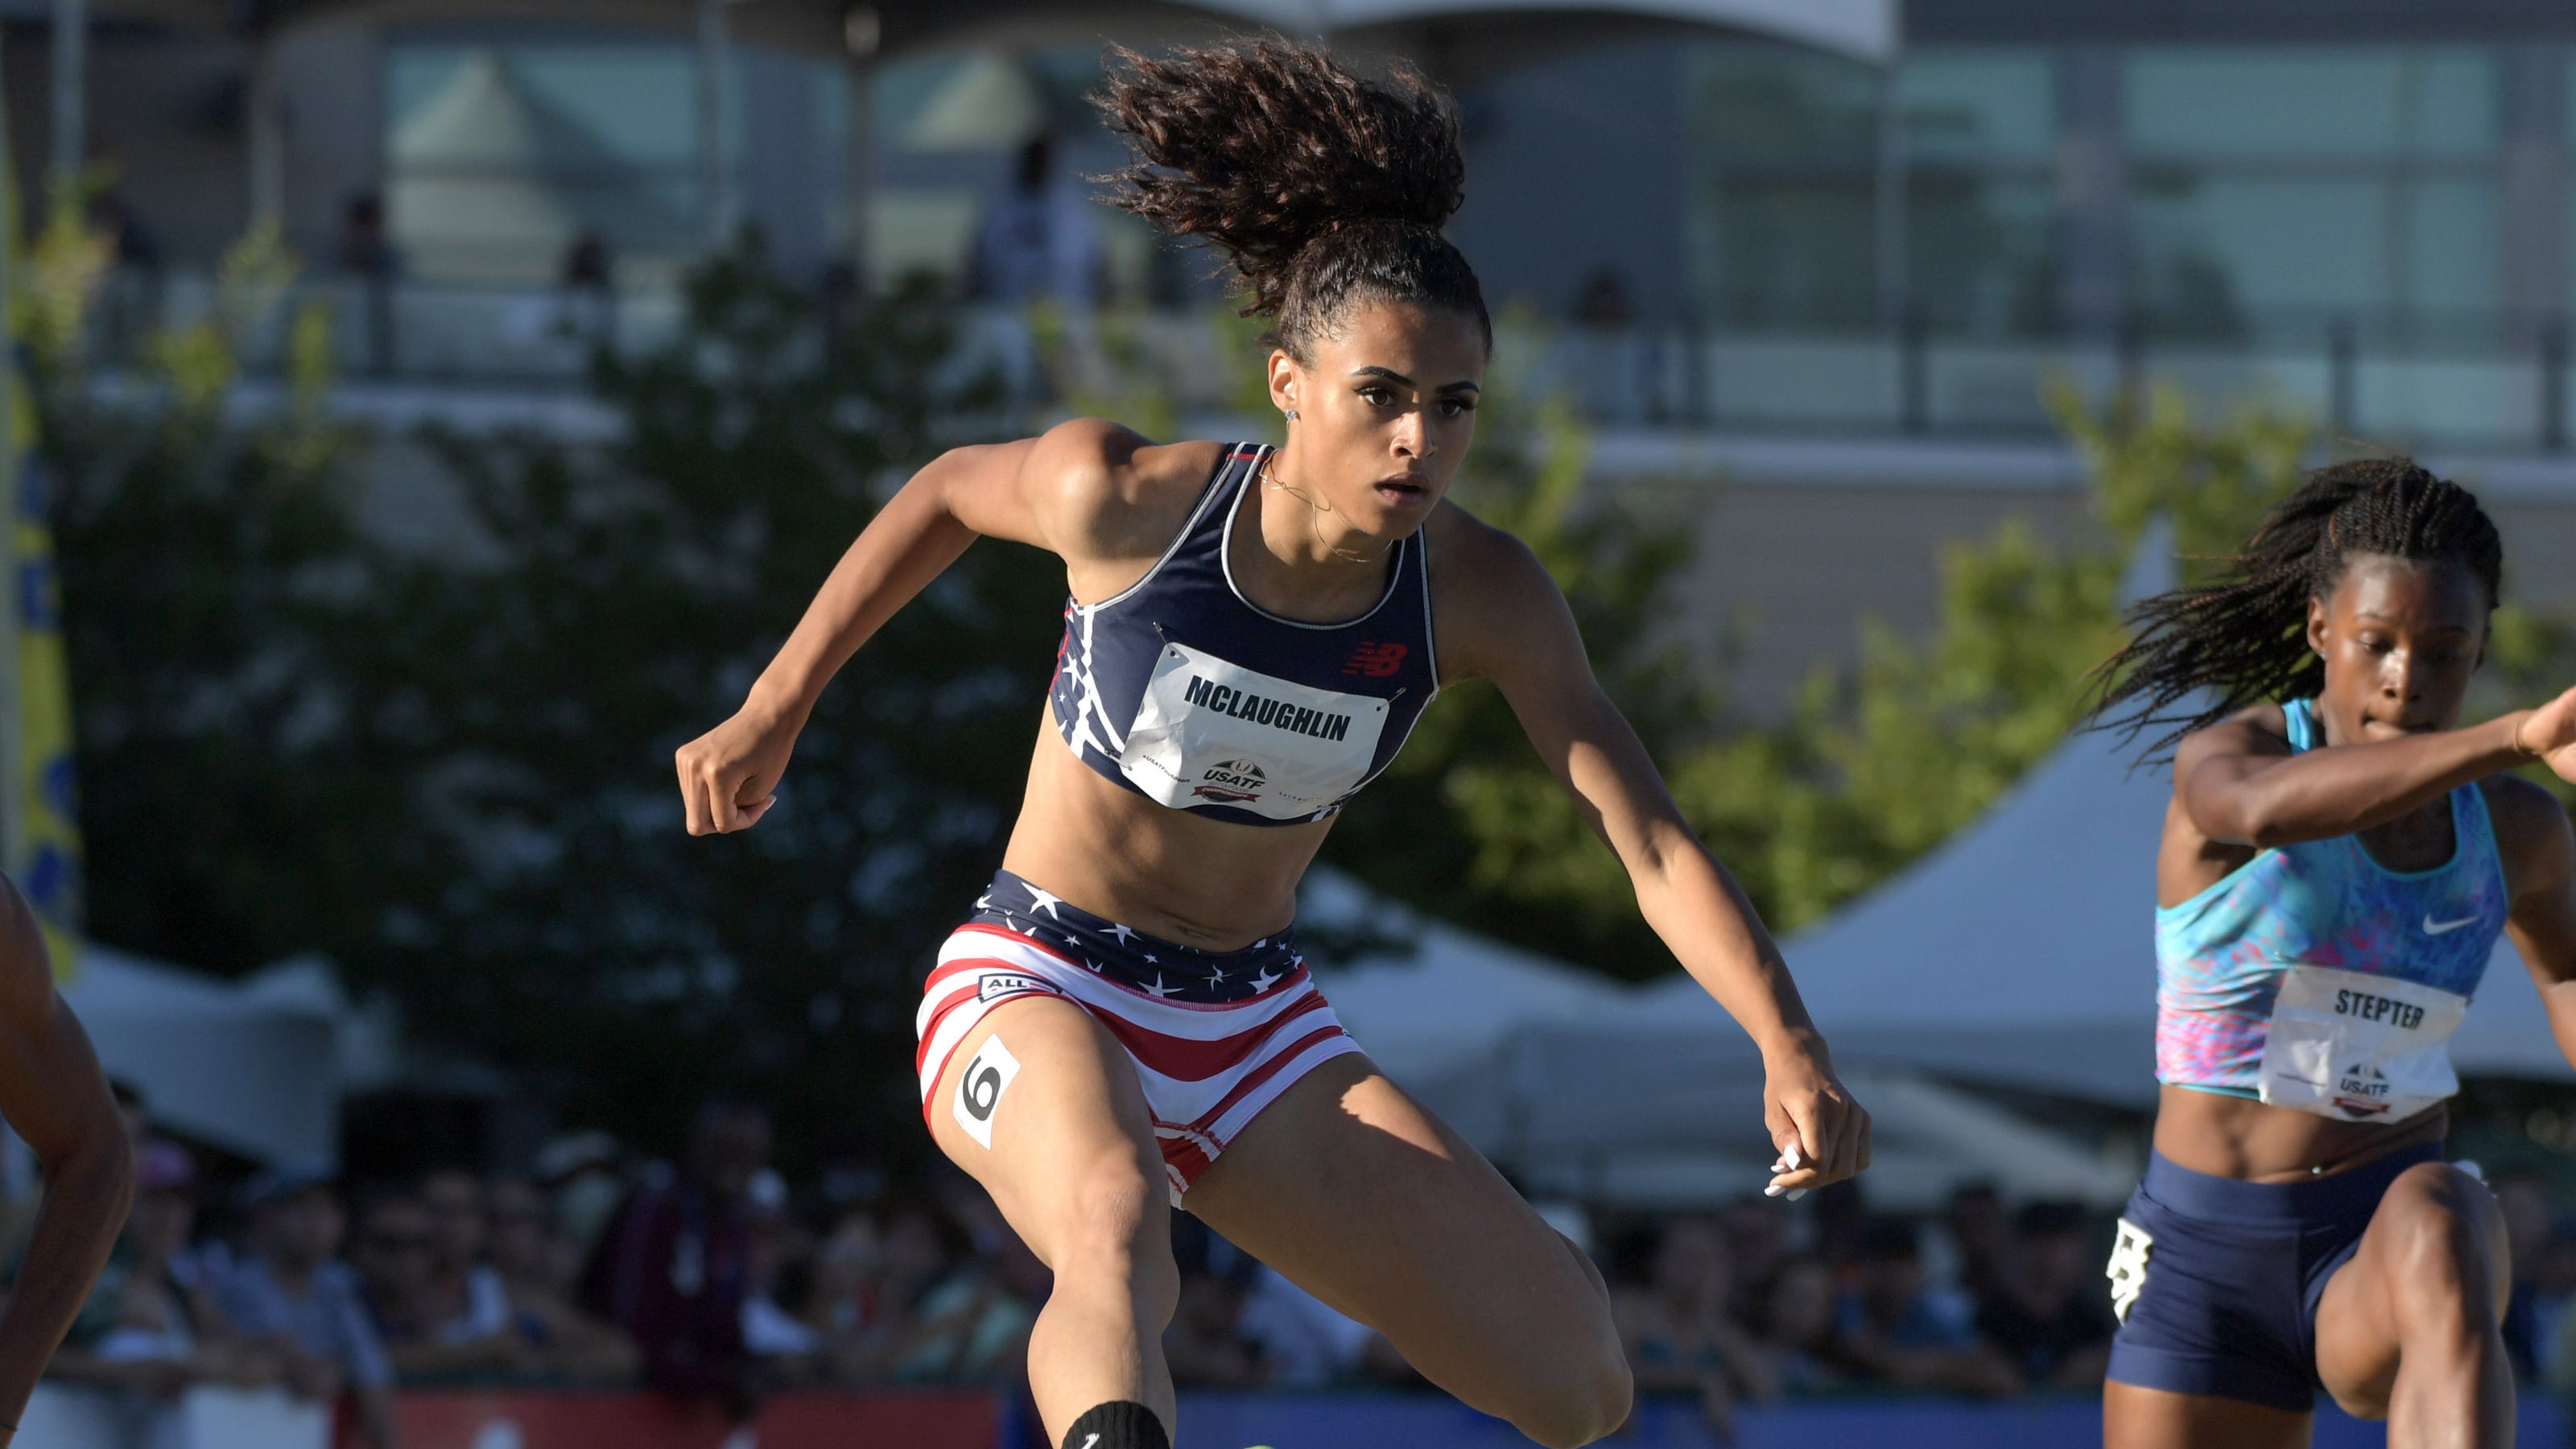 US Olympic trials track & field Event schedule, how to watch/stream